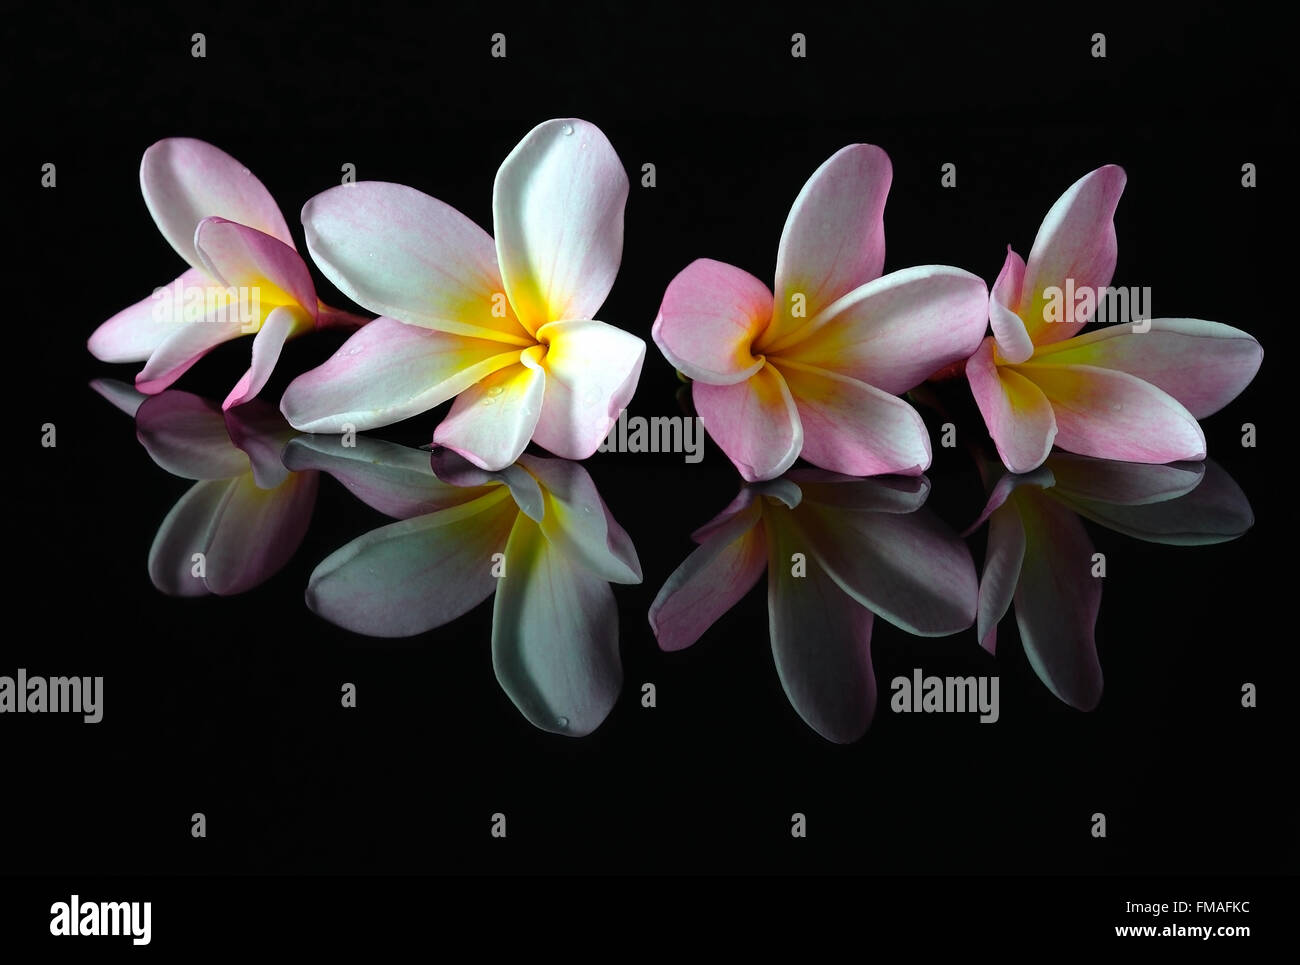 Spa, beauty and wellness concept - Four frangipani flowers with reflection, on dark background. Stock Photo